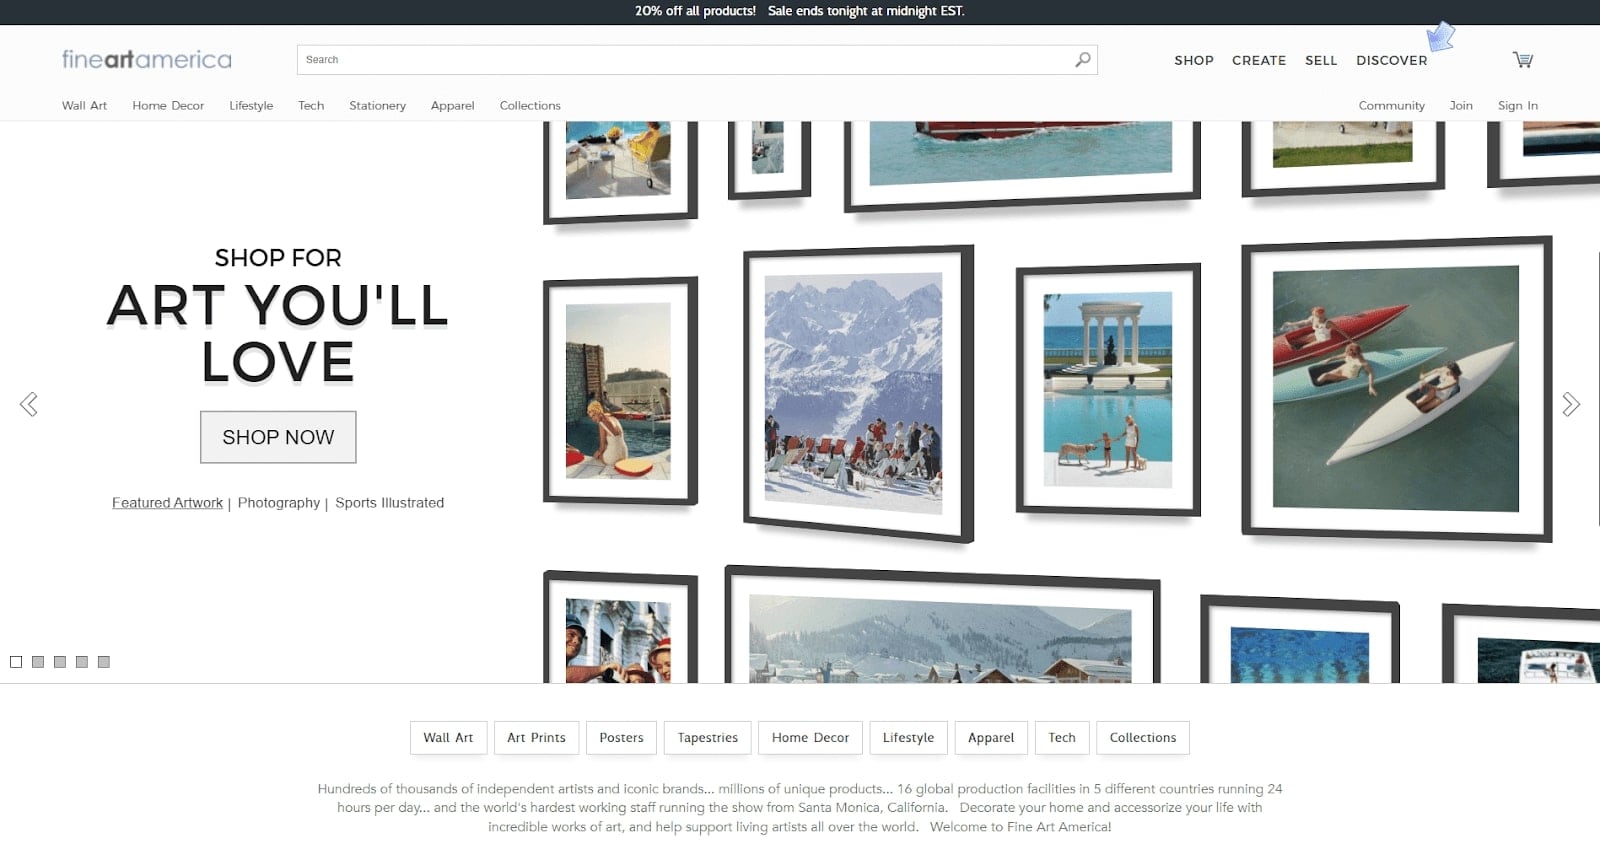 Print on Demand Gallery Boards With Stand - Print API, Dropshipping